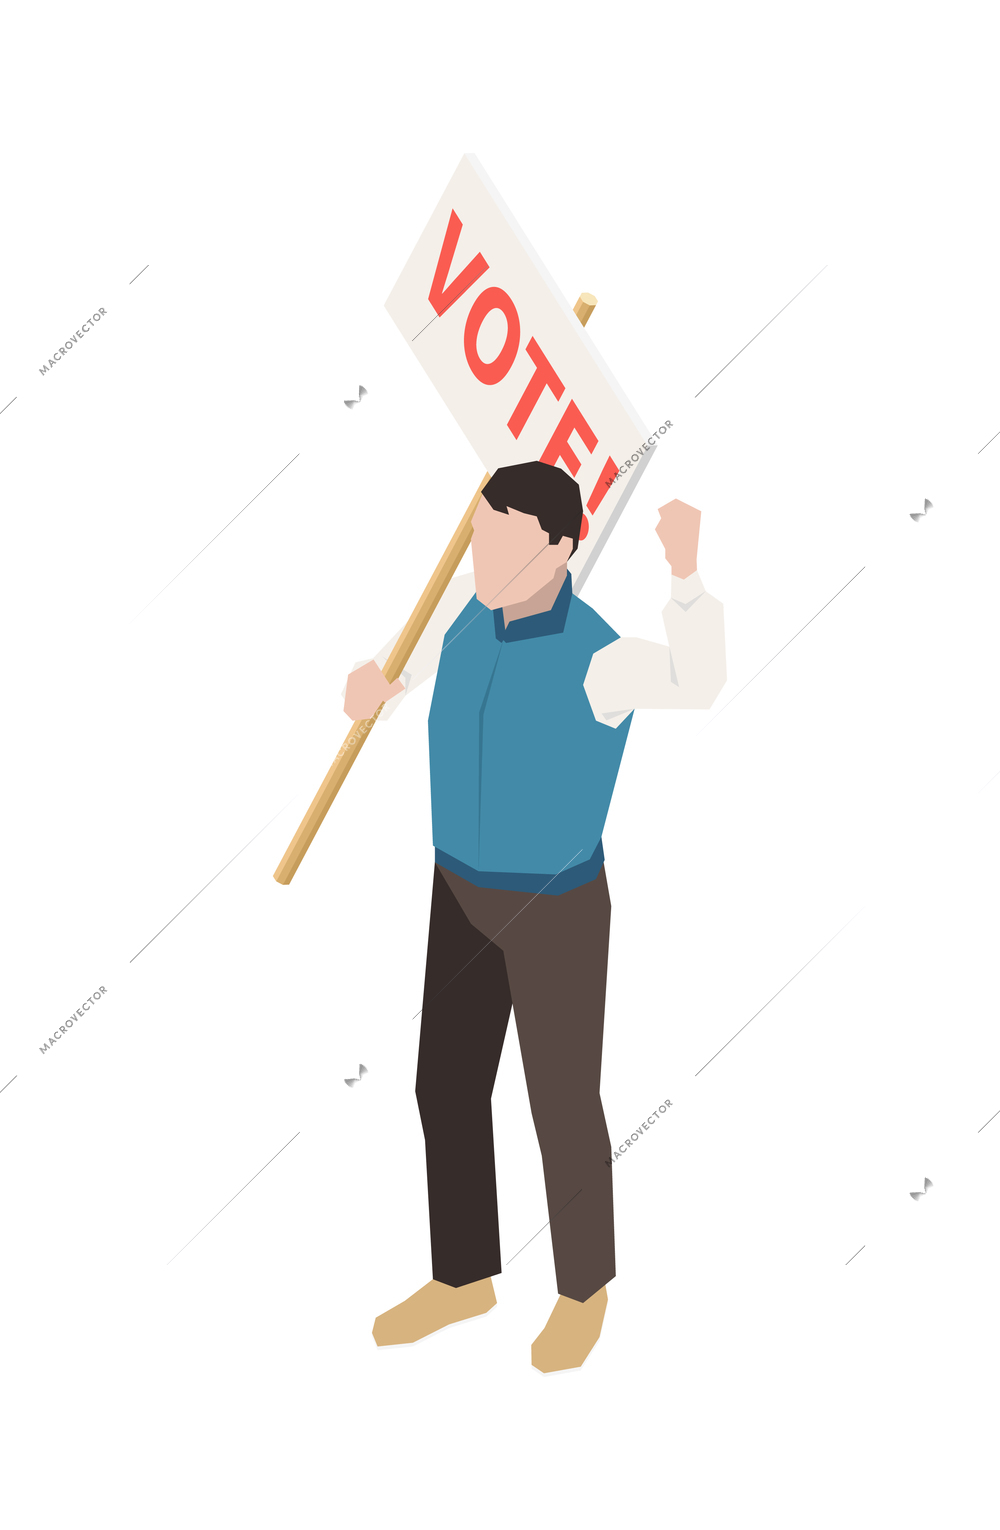 Election voting agitation isometric icon with male character holding placard 3d vector illustration